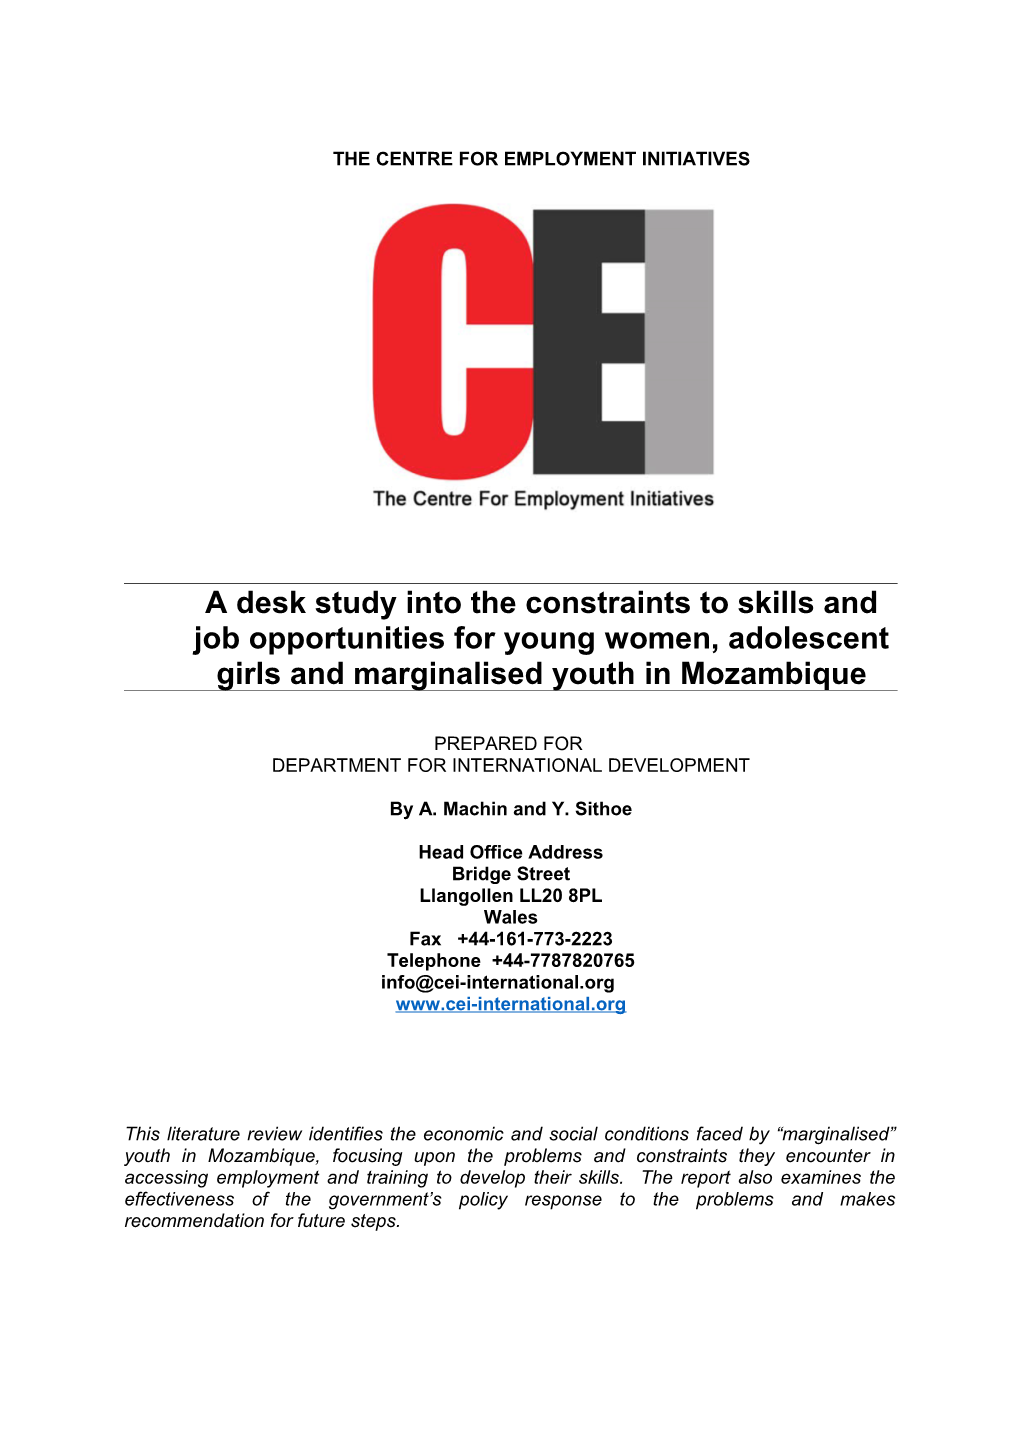 A Desk Study Into The Constraints To Skills And Job Opportunities For Young Women, Adolescent Girls And Marginalised Youth In Mozambique